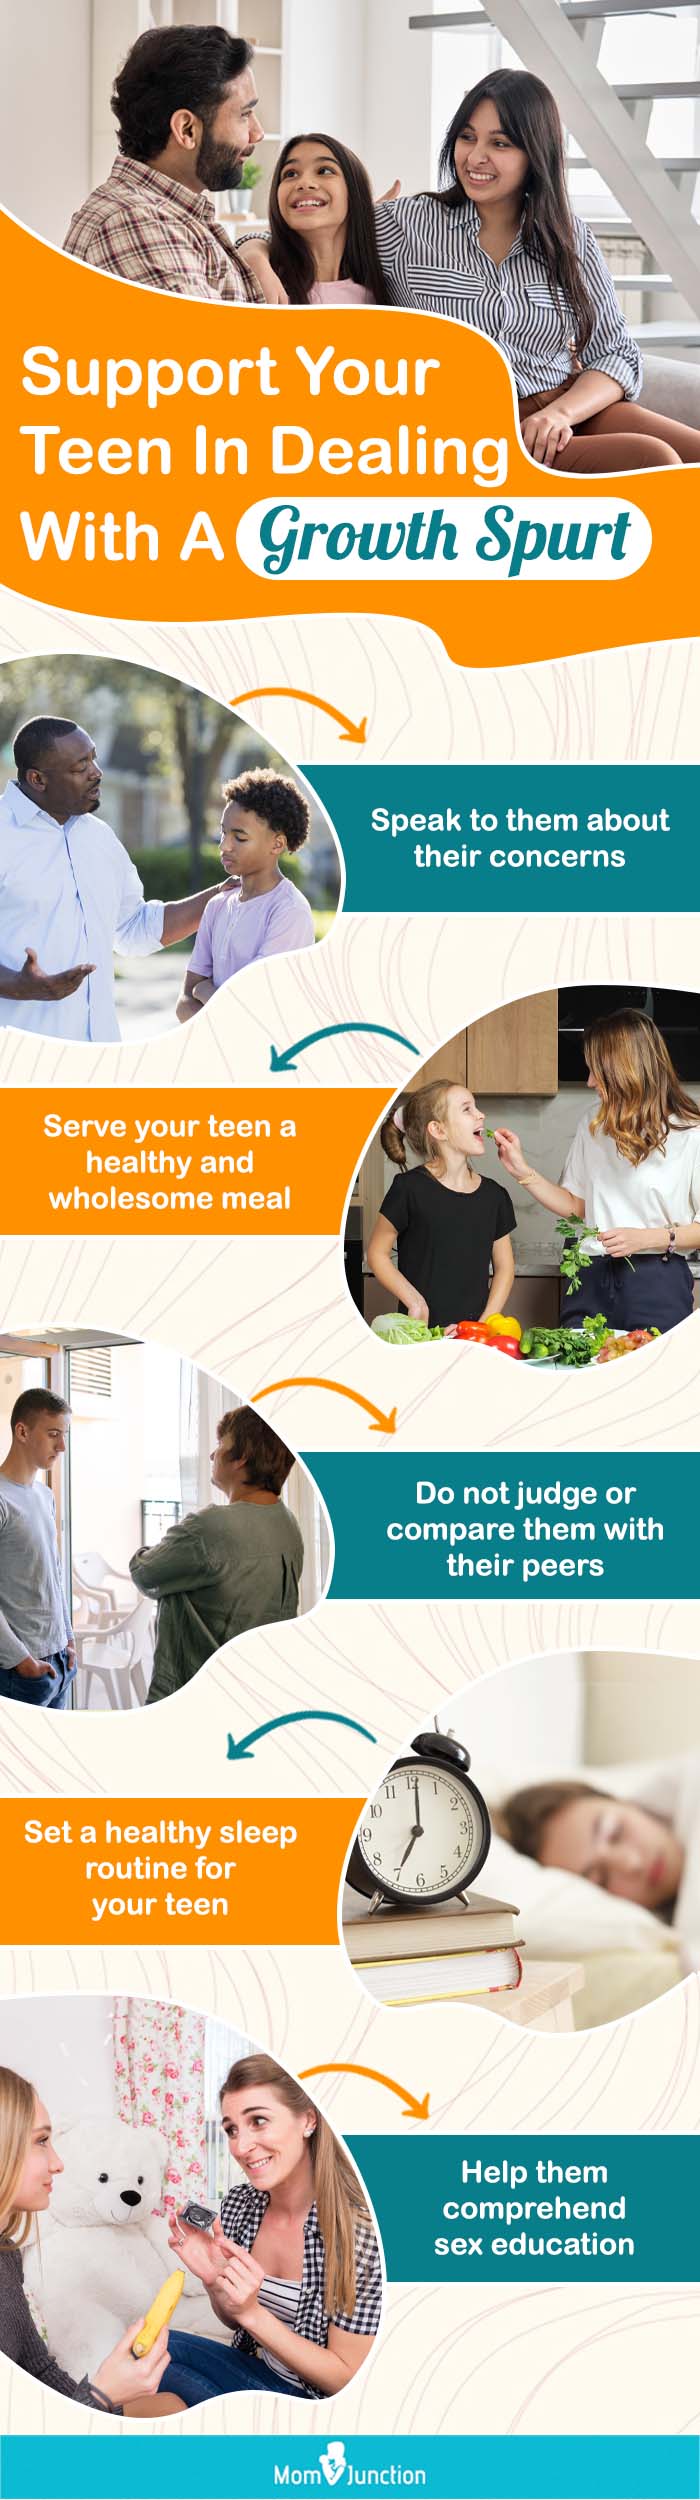 support your teen in dealing with a growth spurt (infographic)